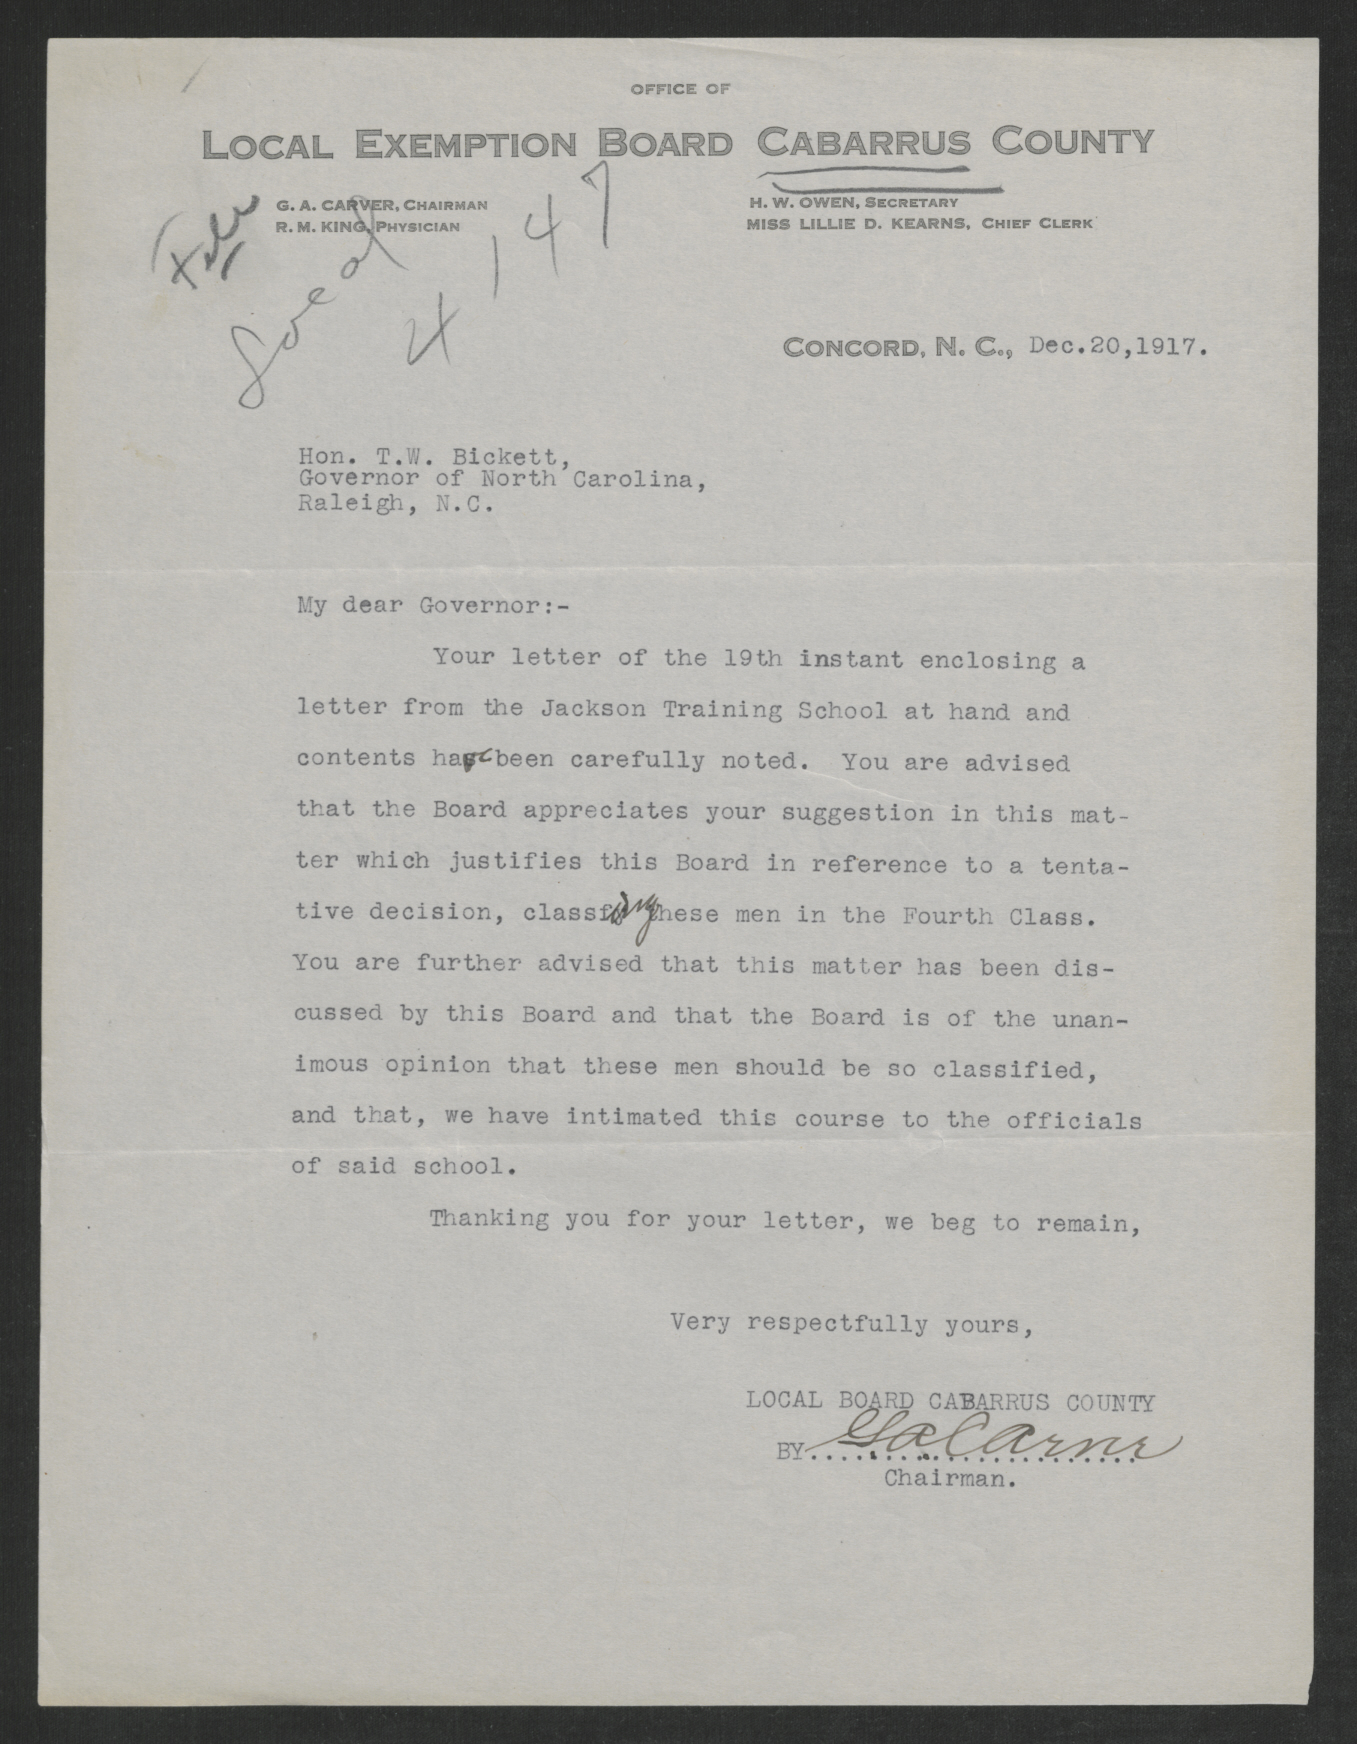 Letter from Gordon A. Carver to Thomas W. Bickett, December 20, 1917